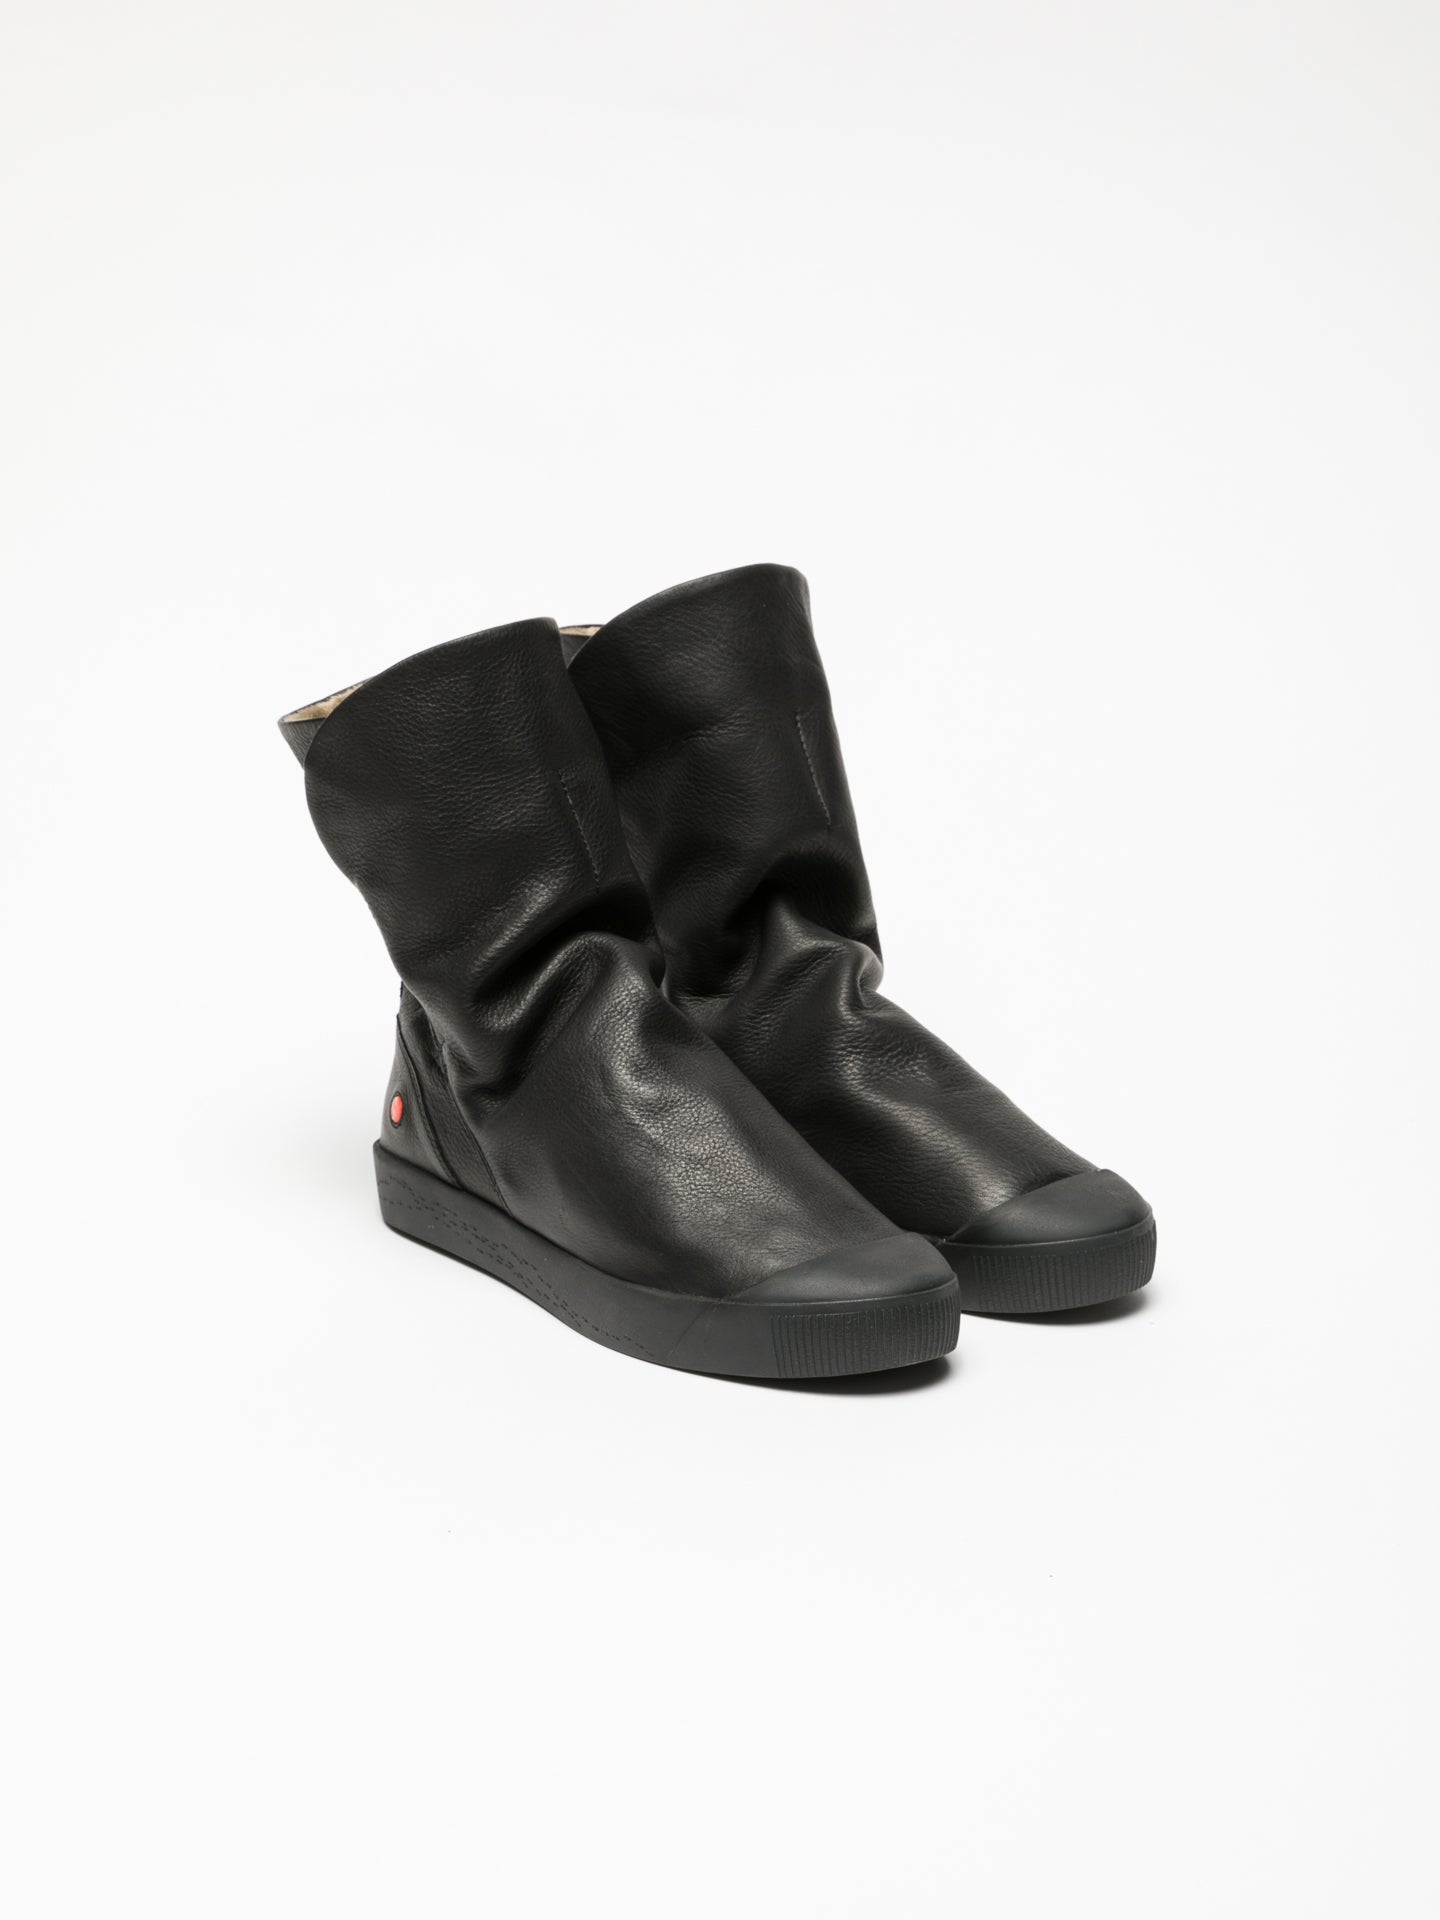 Softinos Black Round Toe Ankle Boots